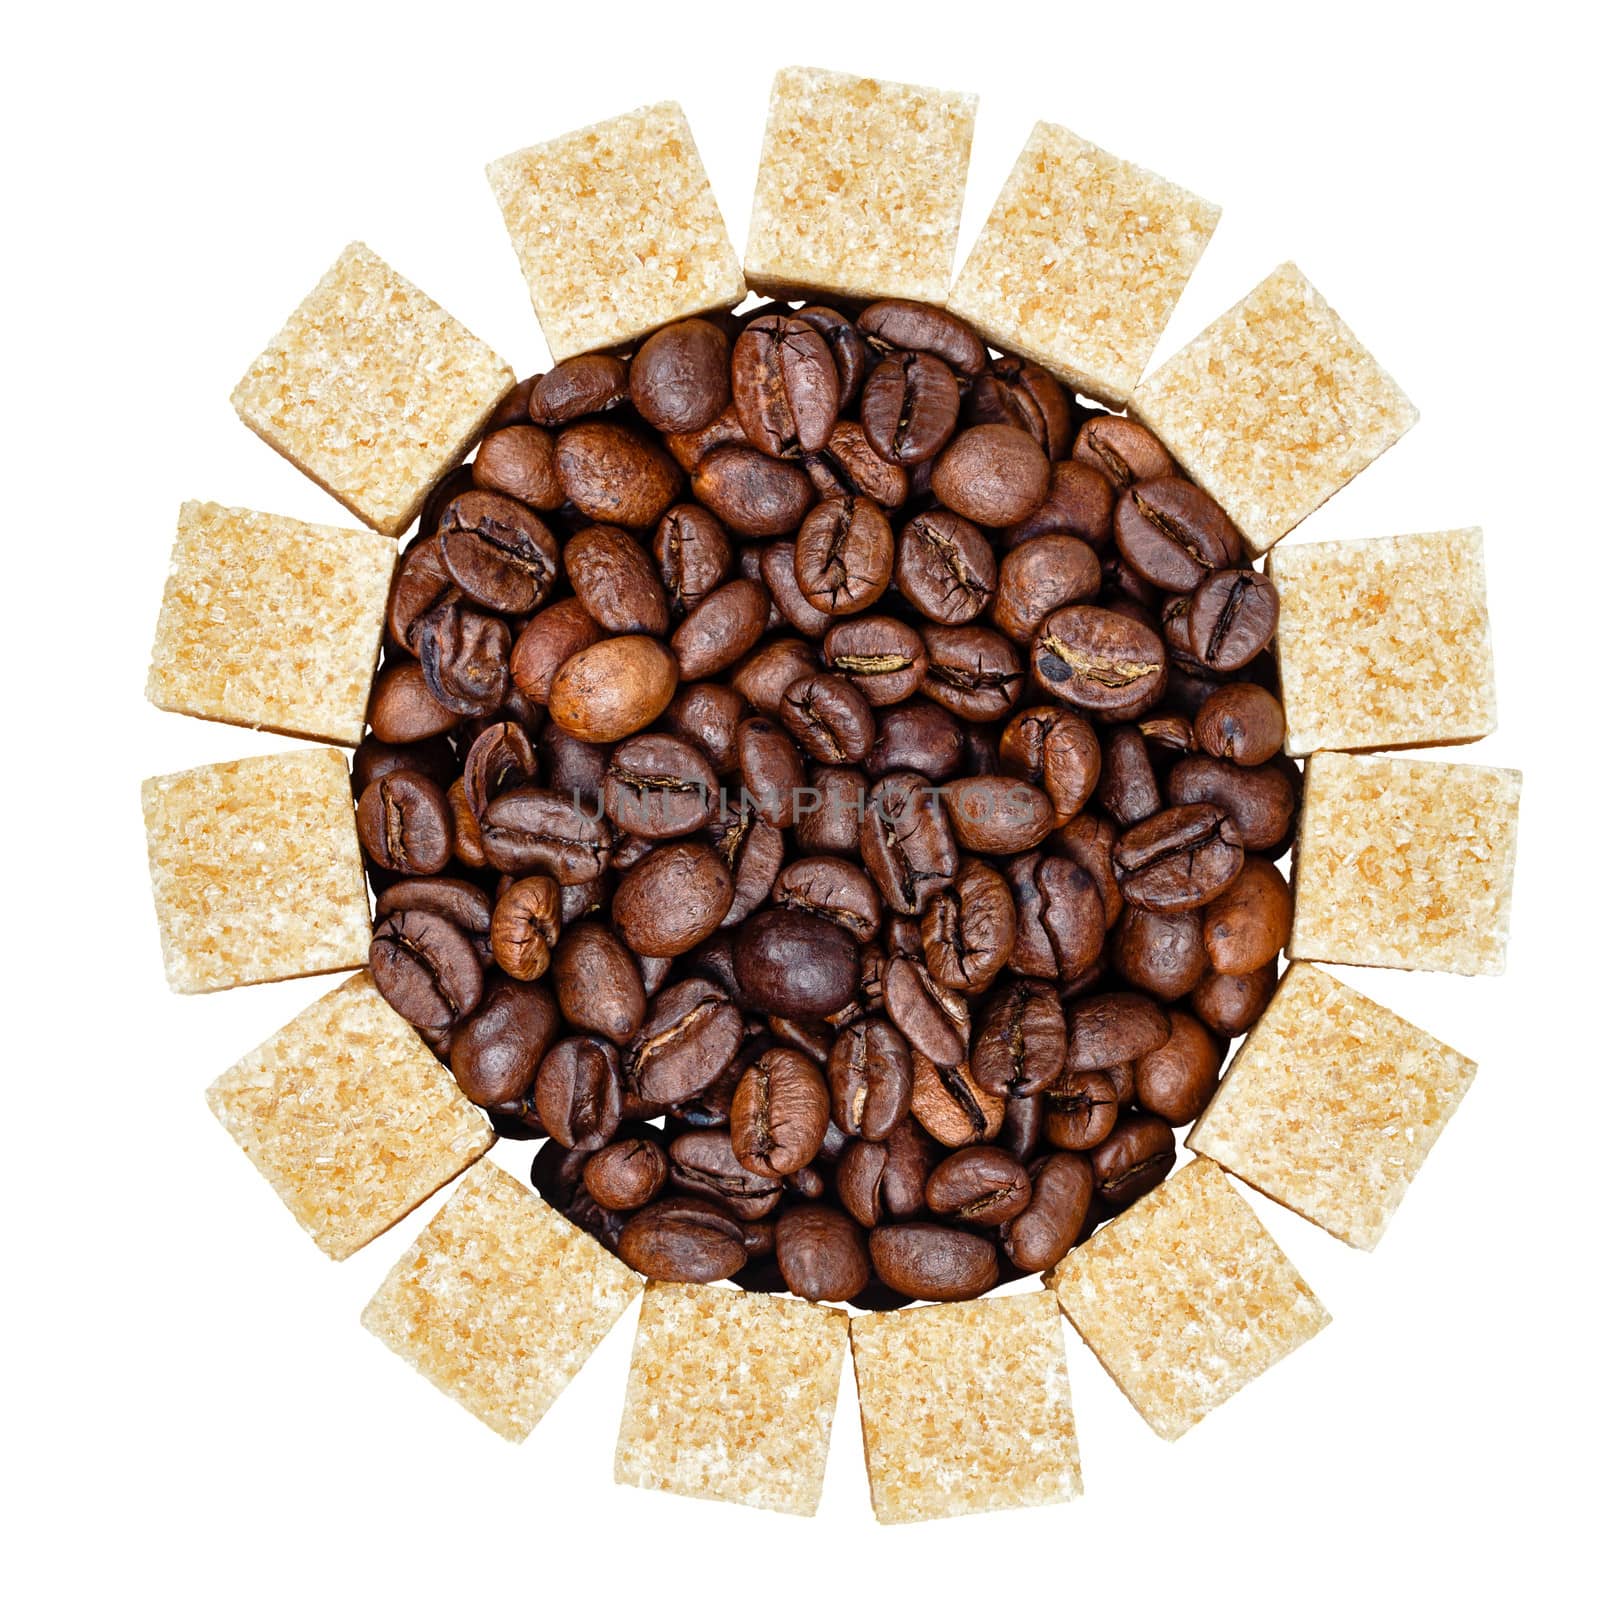 Coffee grains and refined sugar isolated on a white background, shot in studio